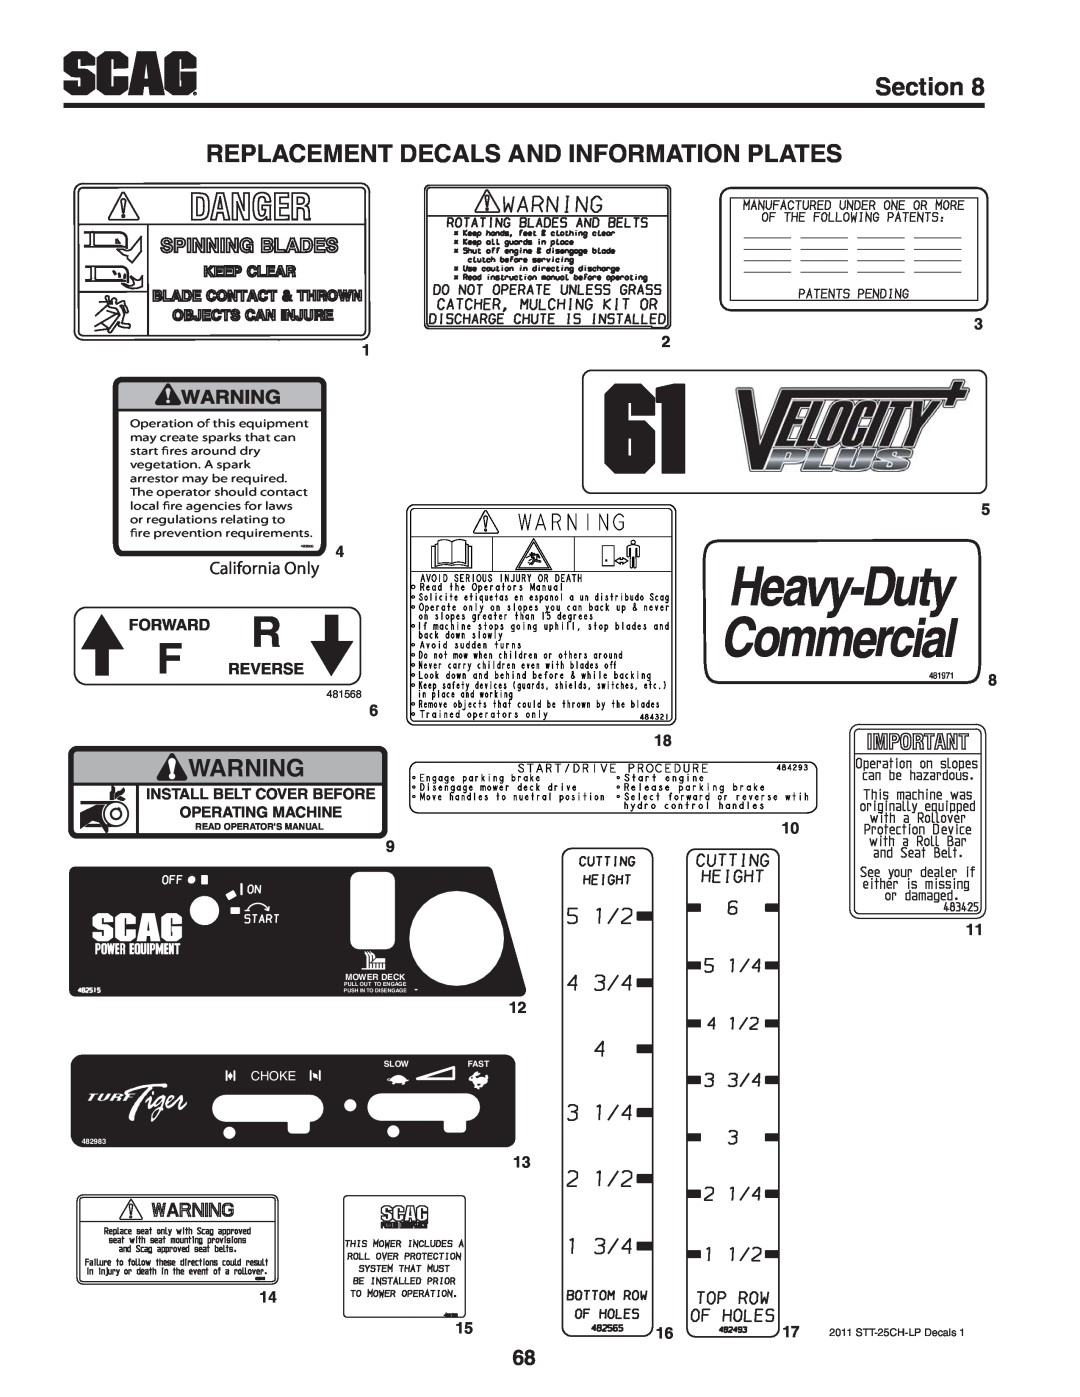 Scag Power Equipment STT52V-25CH-LP Replacement Decals And Information Plates, Heavy-Duty, Commercial, Section, Forward 